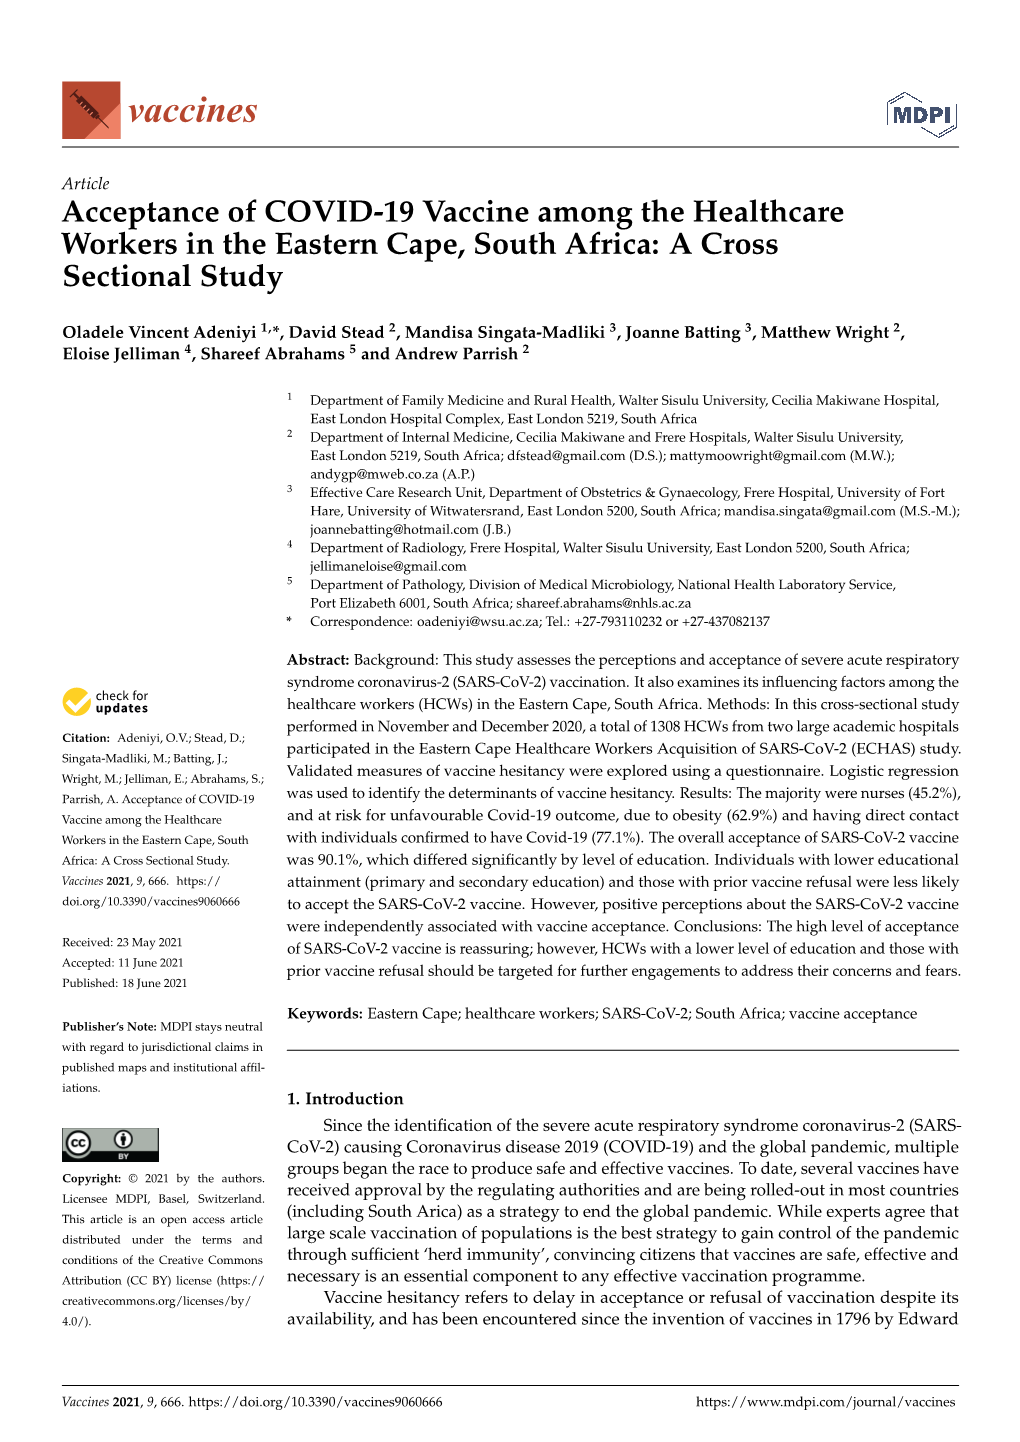 Acceptance of COVID-19 Vaccine Among the Healthcare Workers in the Eastern Cape, South Africa: a Cross Sectional Study